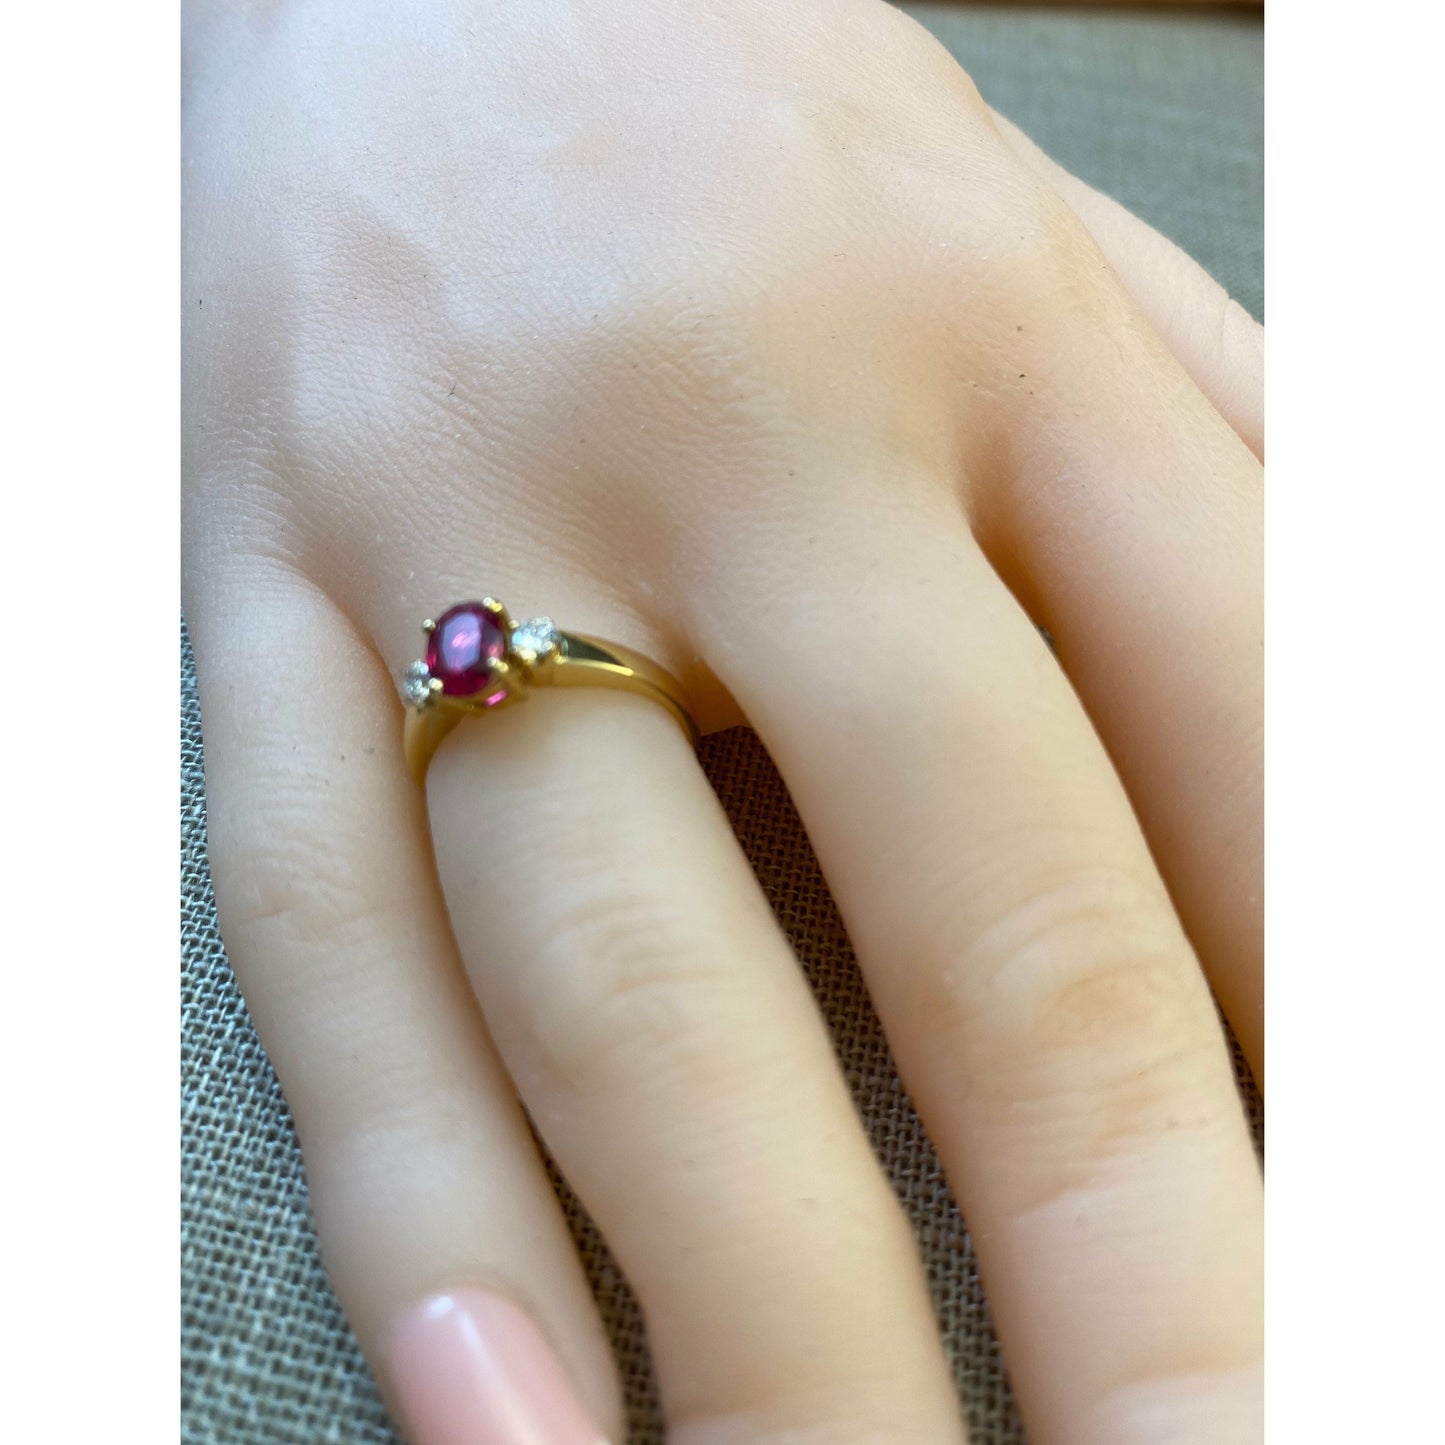 FJL Jewelry Rings Sold_Three-Stone Ruby and Diamond Ring in 18K Gold Engagement Ring, Oval 0.78 CT. Ruby